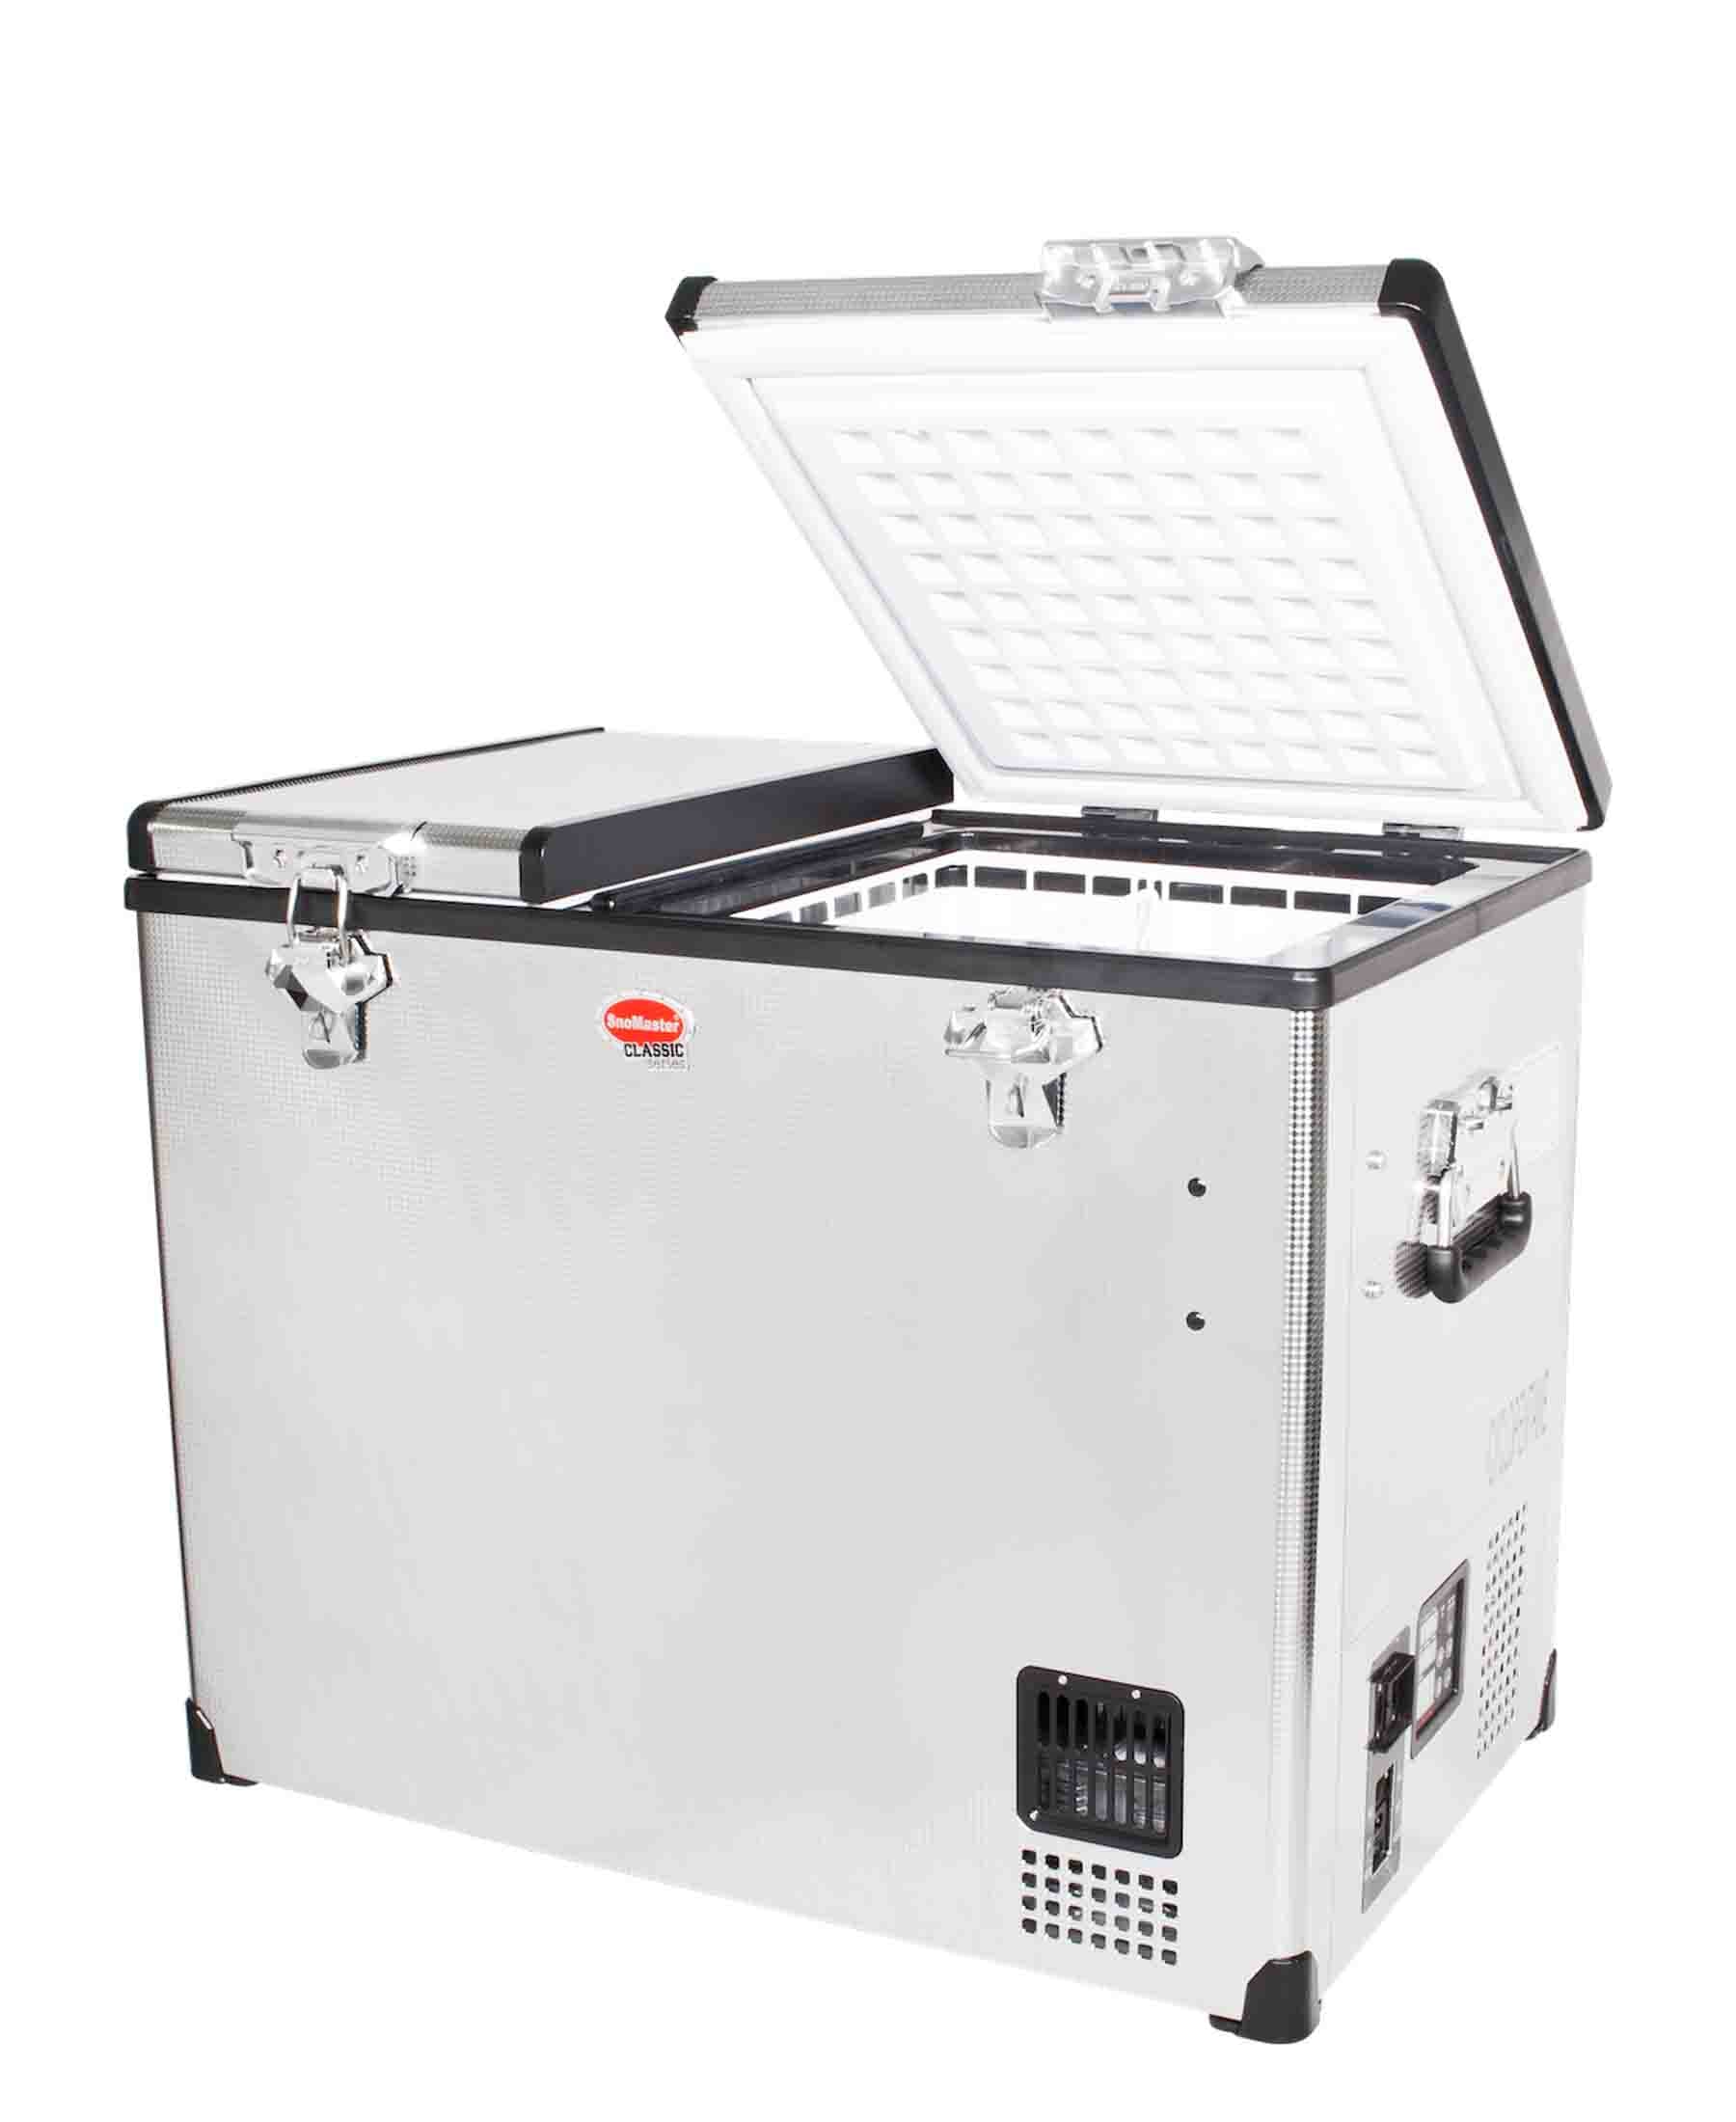 SnoMaster 72L Dual Compartment Camping Freezer - Silver